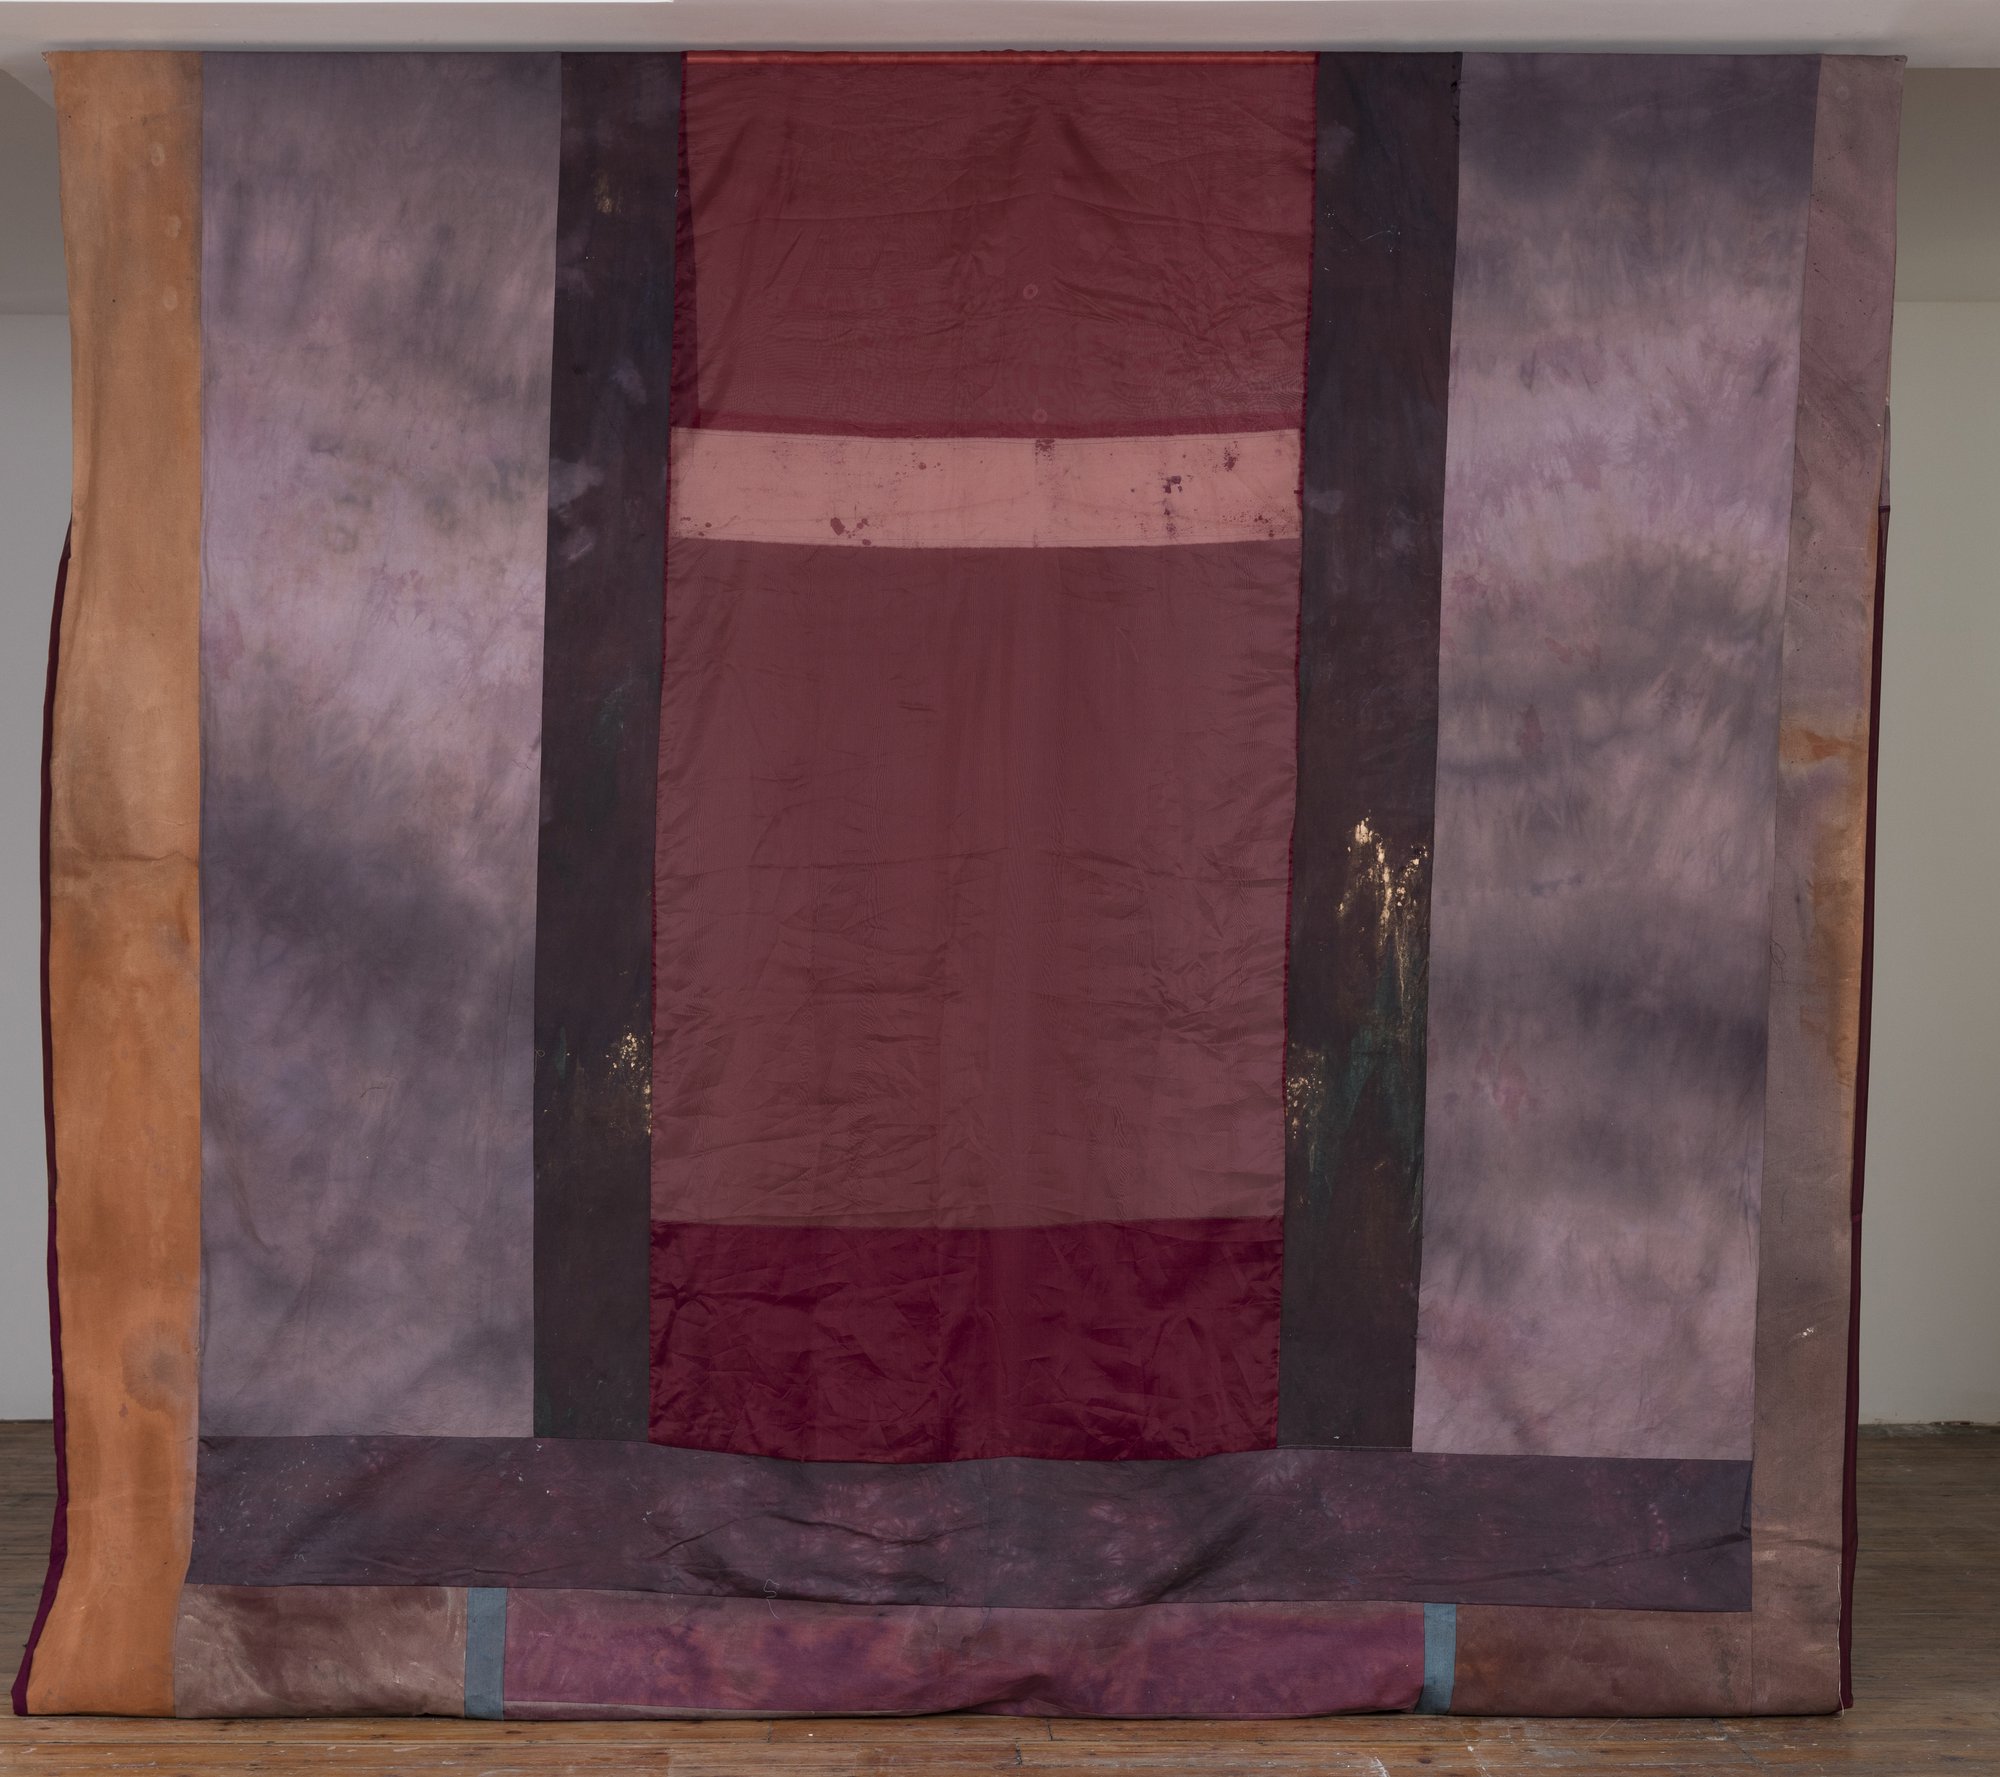 Tamara Henderson, Capers Weep For the Wine hued Burgundy, Curtain, mixed textiles, 340 x 290 cm, 2016